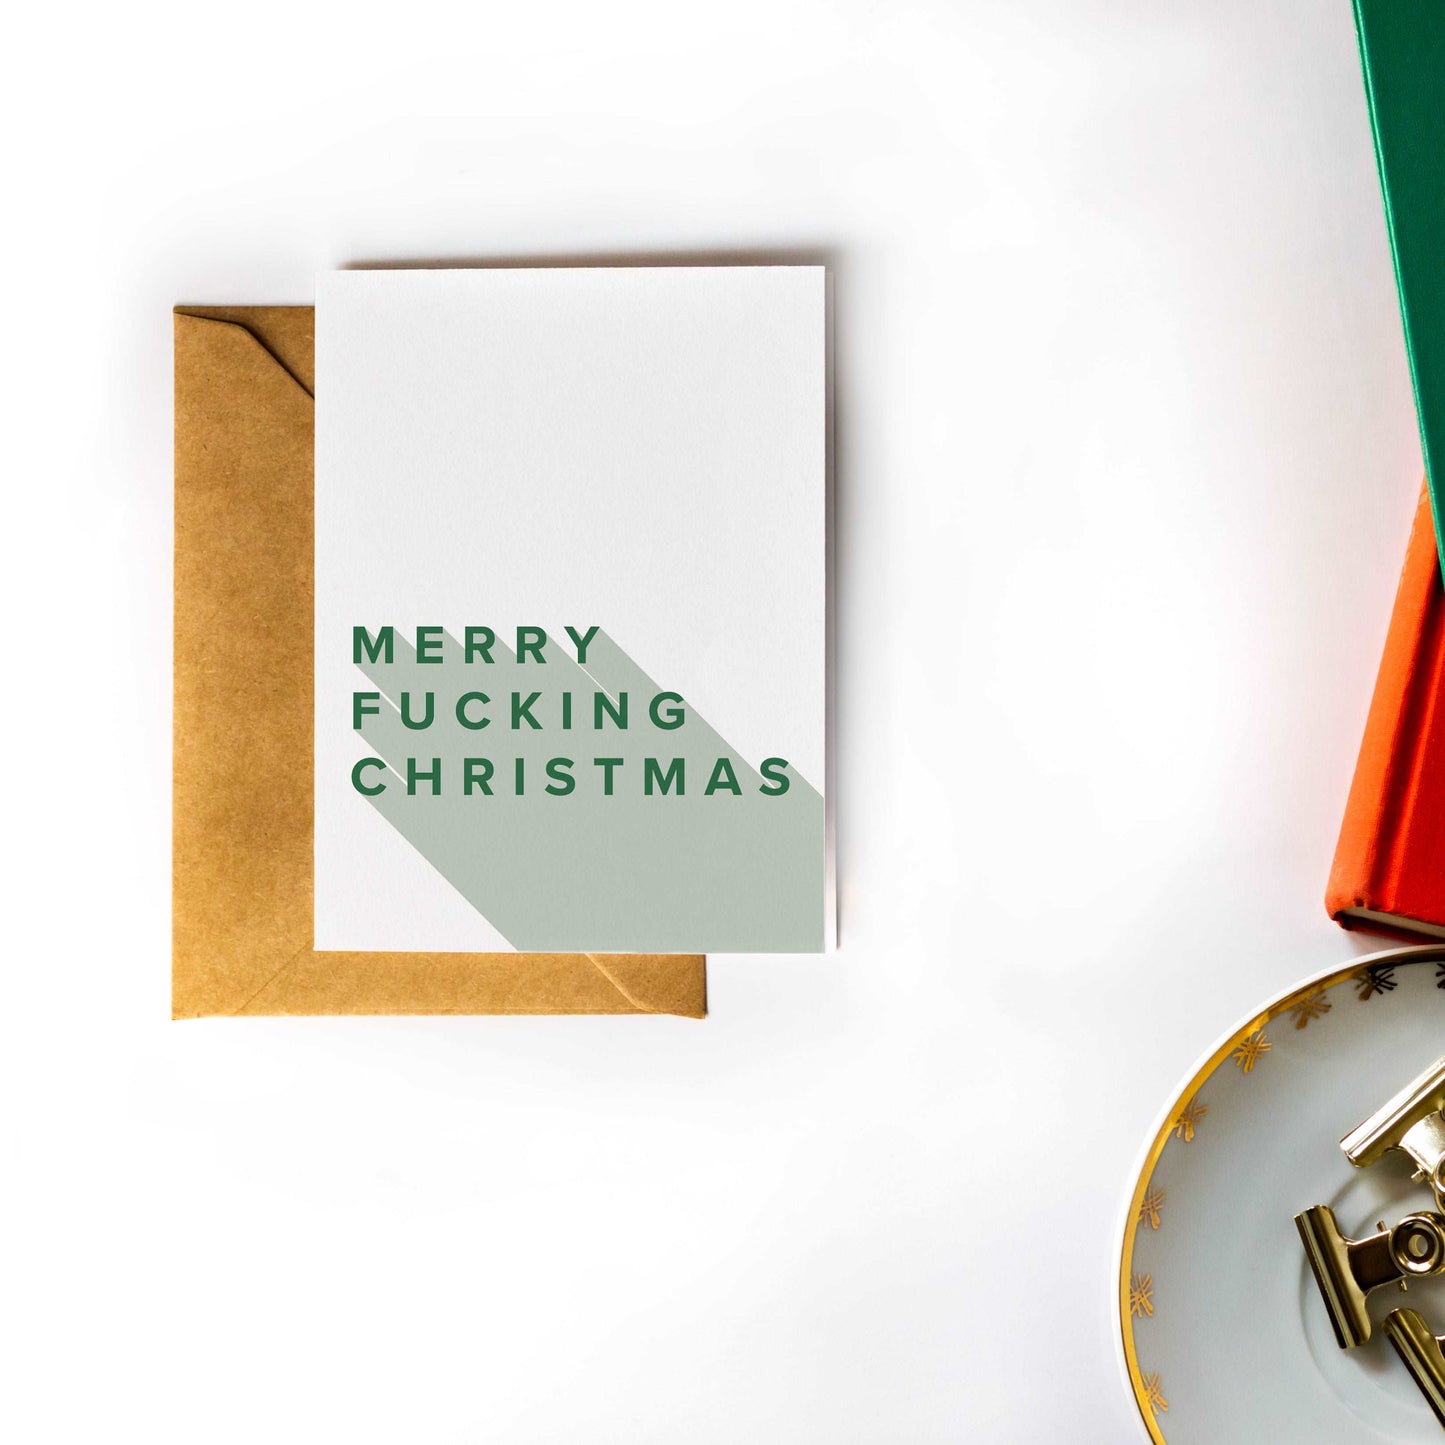 Merry Fucking Christmas - Funny Christmas Holiday Card with Kraft Envelope